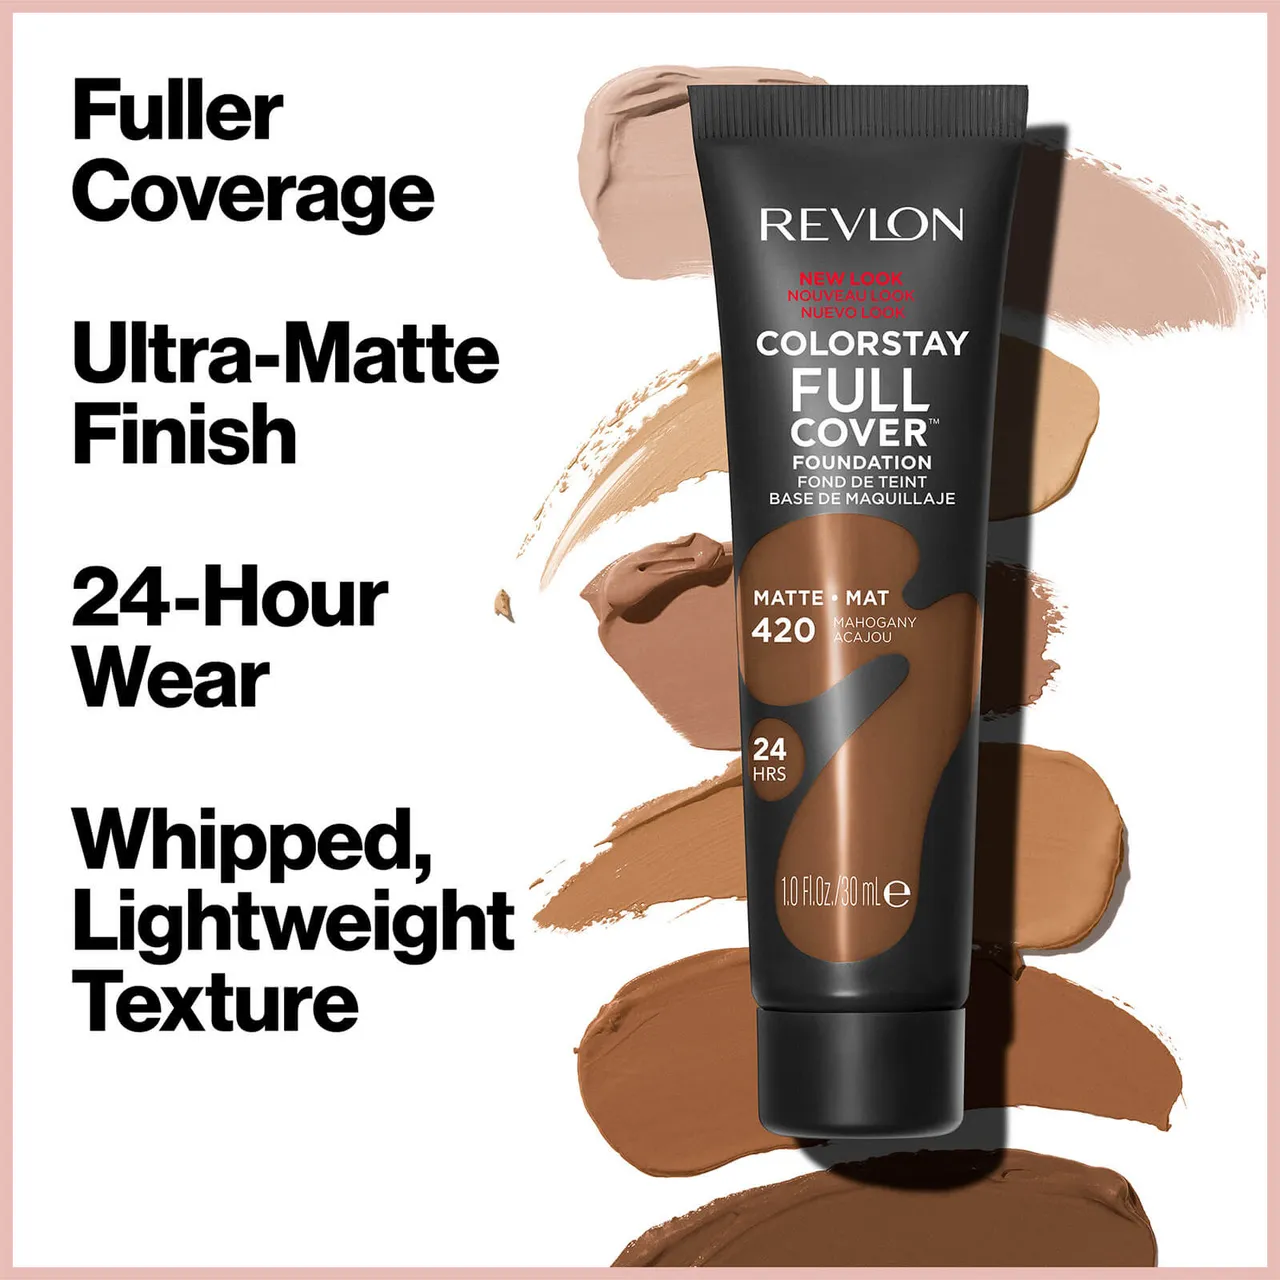 Revlon Colorstay Full Cover Foundation 31g (Various Shades) - Natural Beige